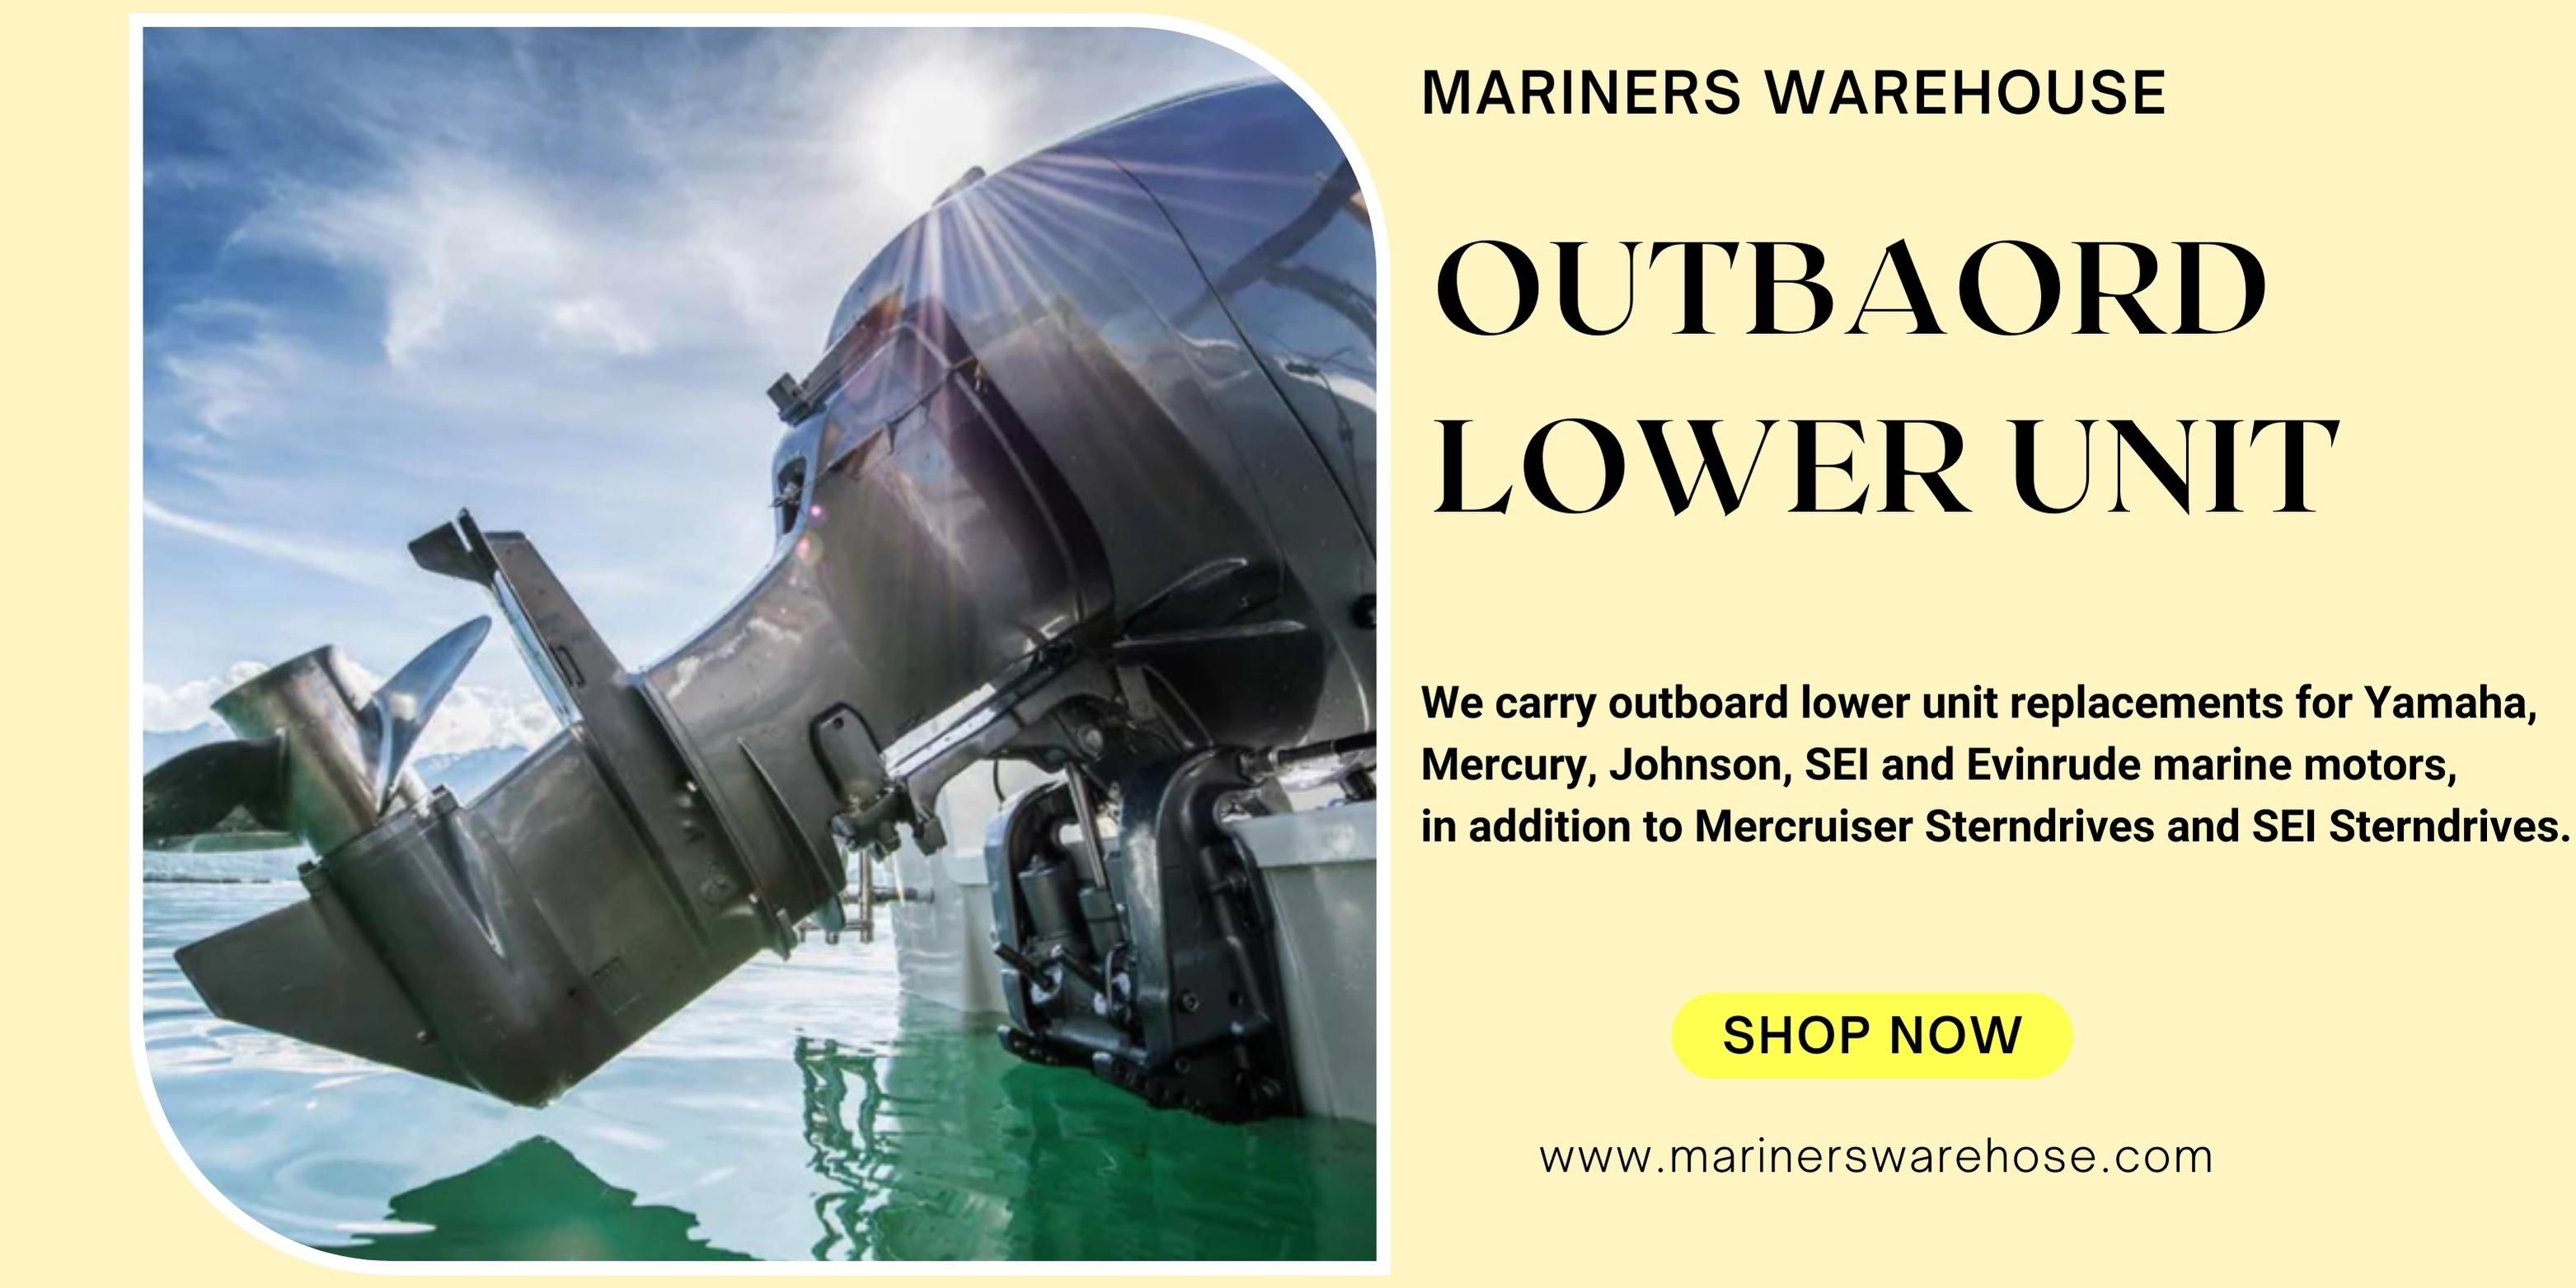 Best-outboard-lower-unit-by-marinerswarehouse